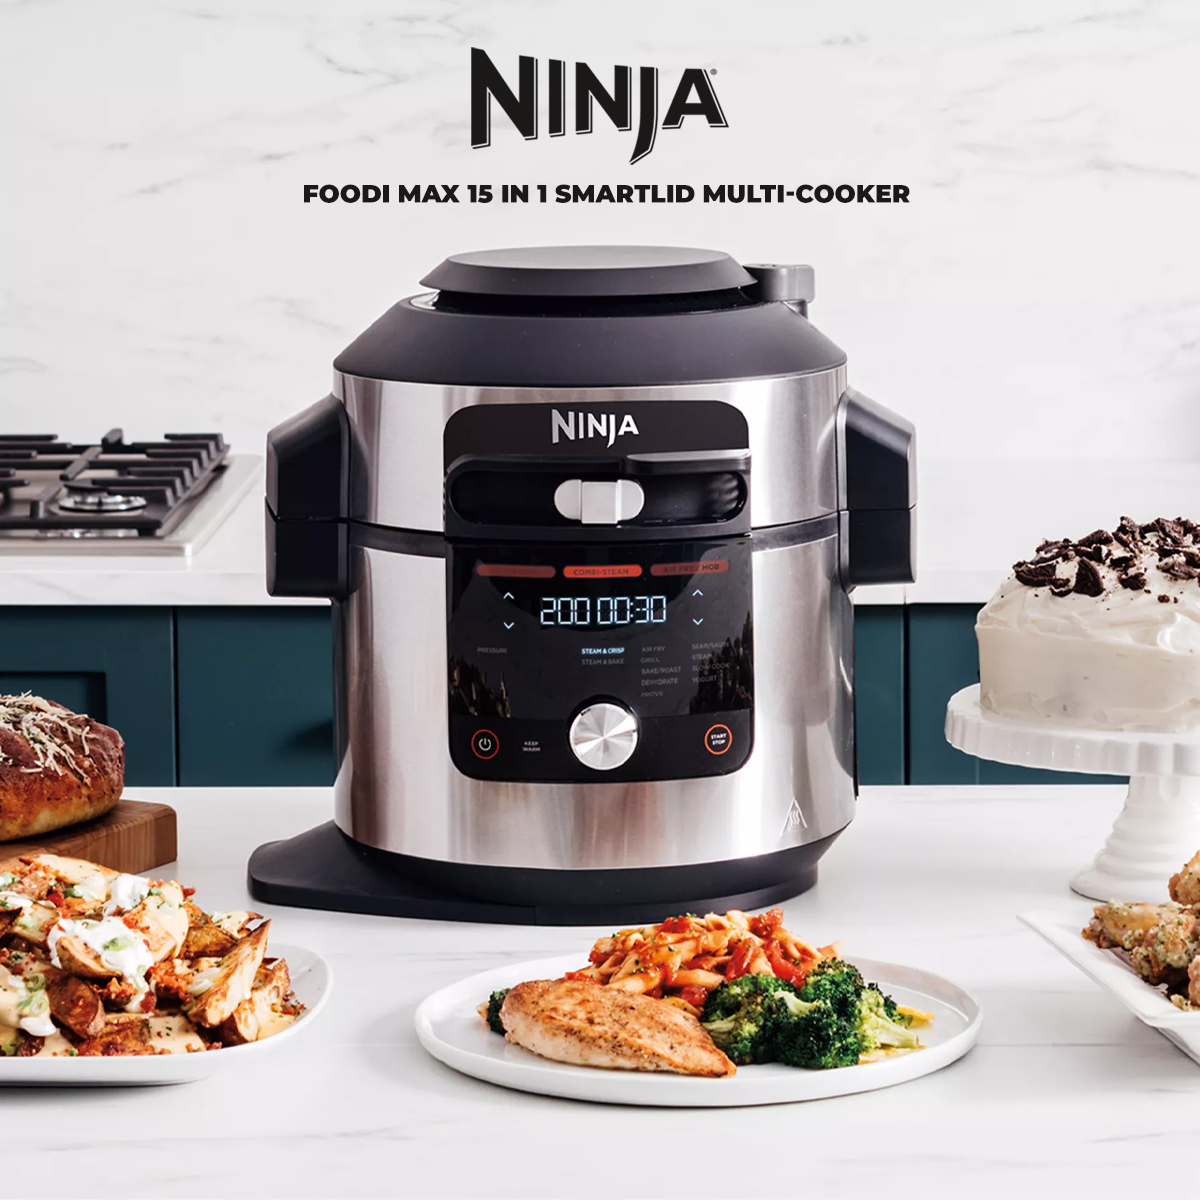 https://www.paragoncompetitions.co.uk/wp-content/uploads/ninja-foodi-max-15-in-1-smart-lid-multi-cooker-product.jpg